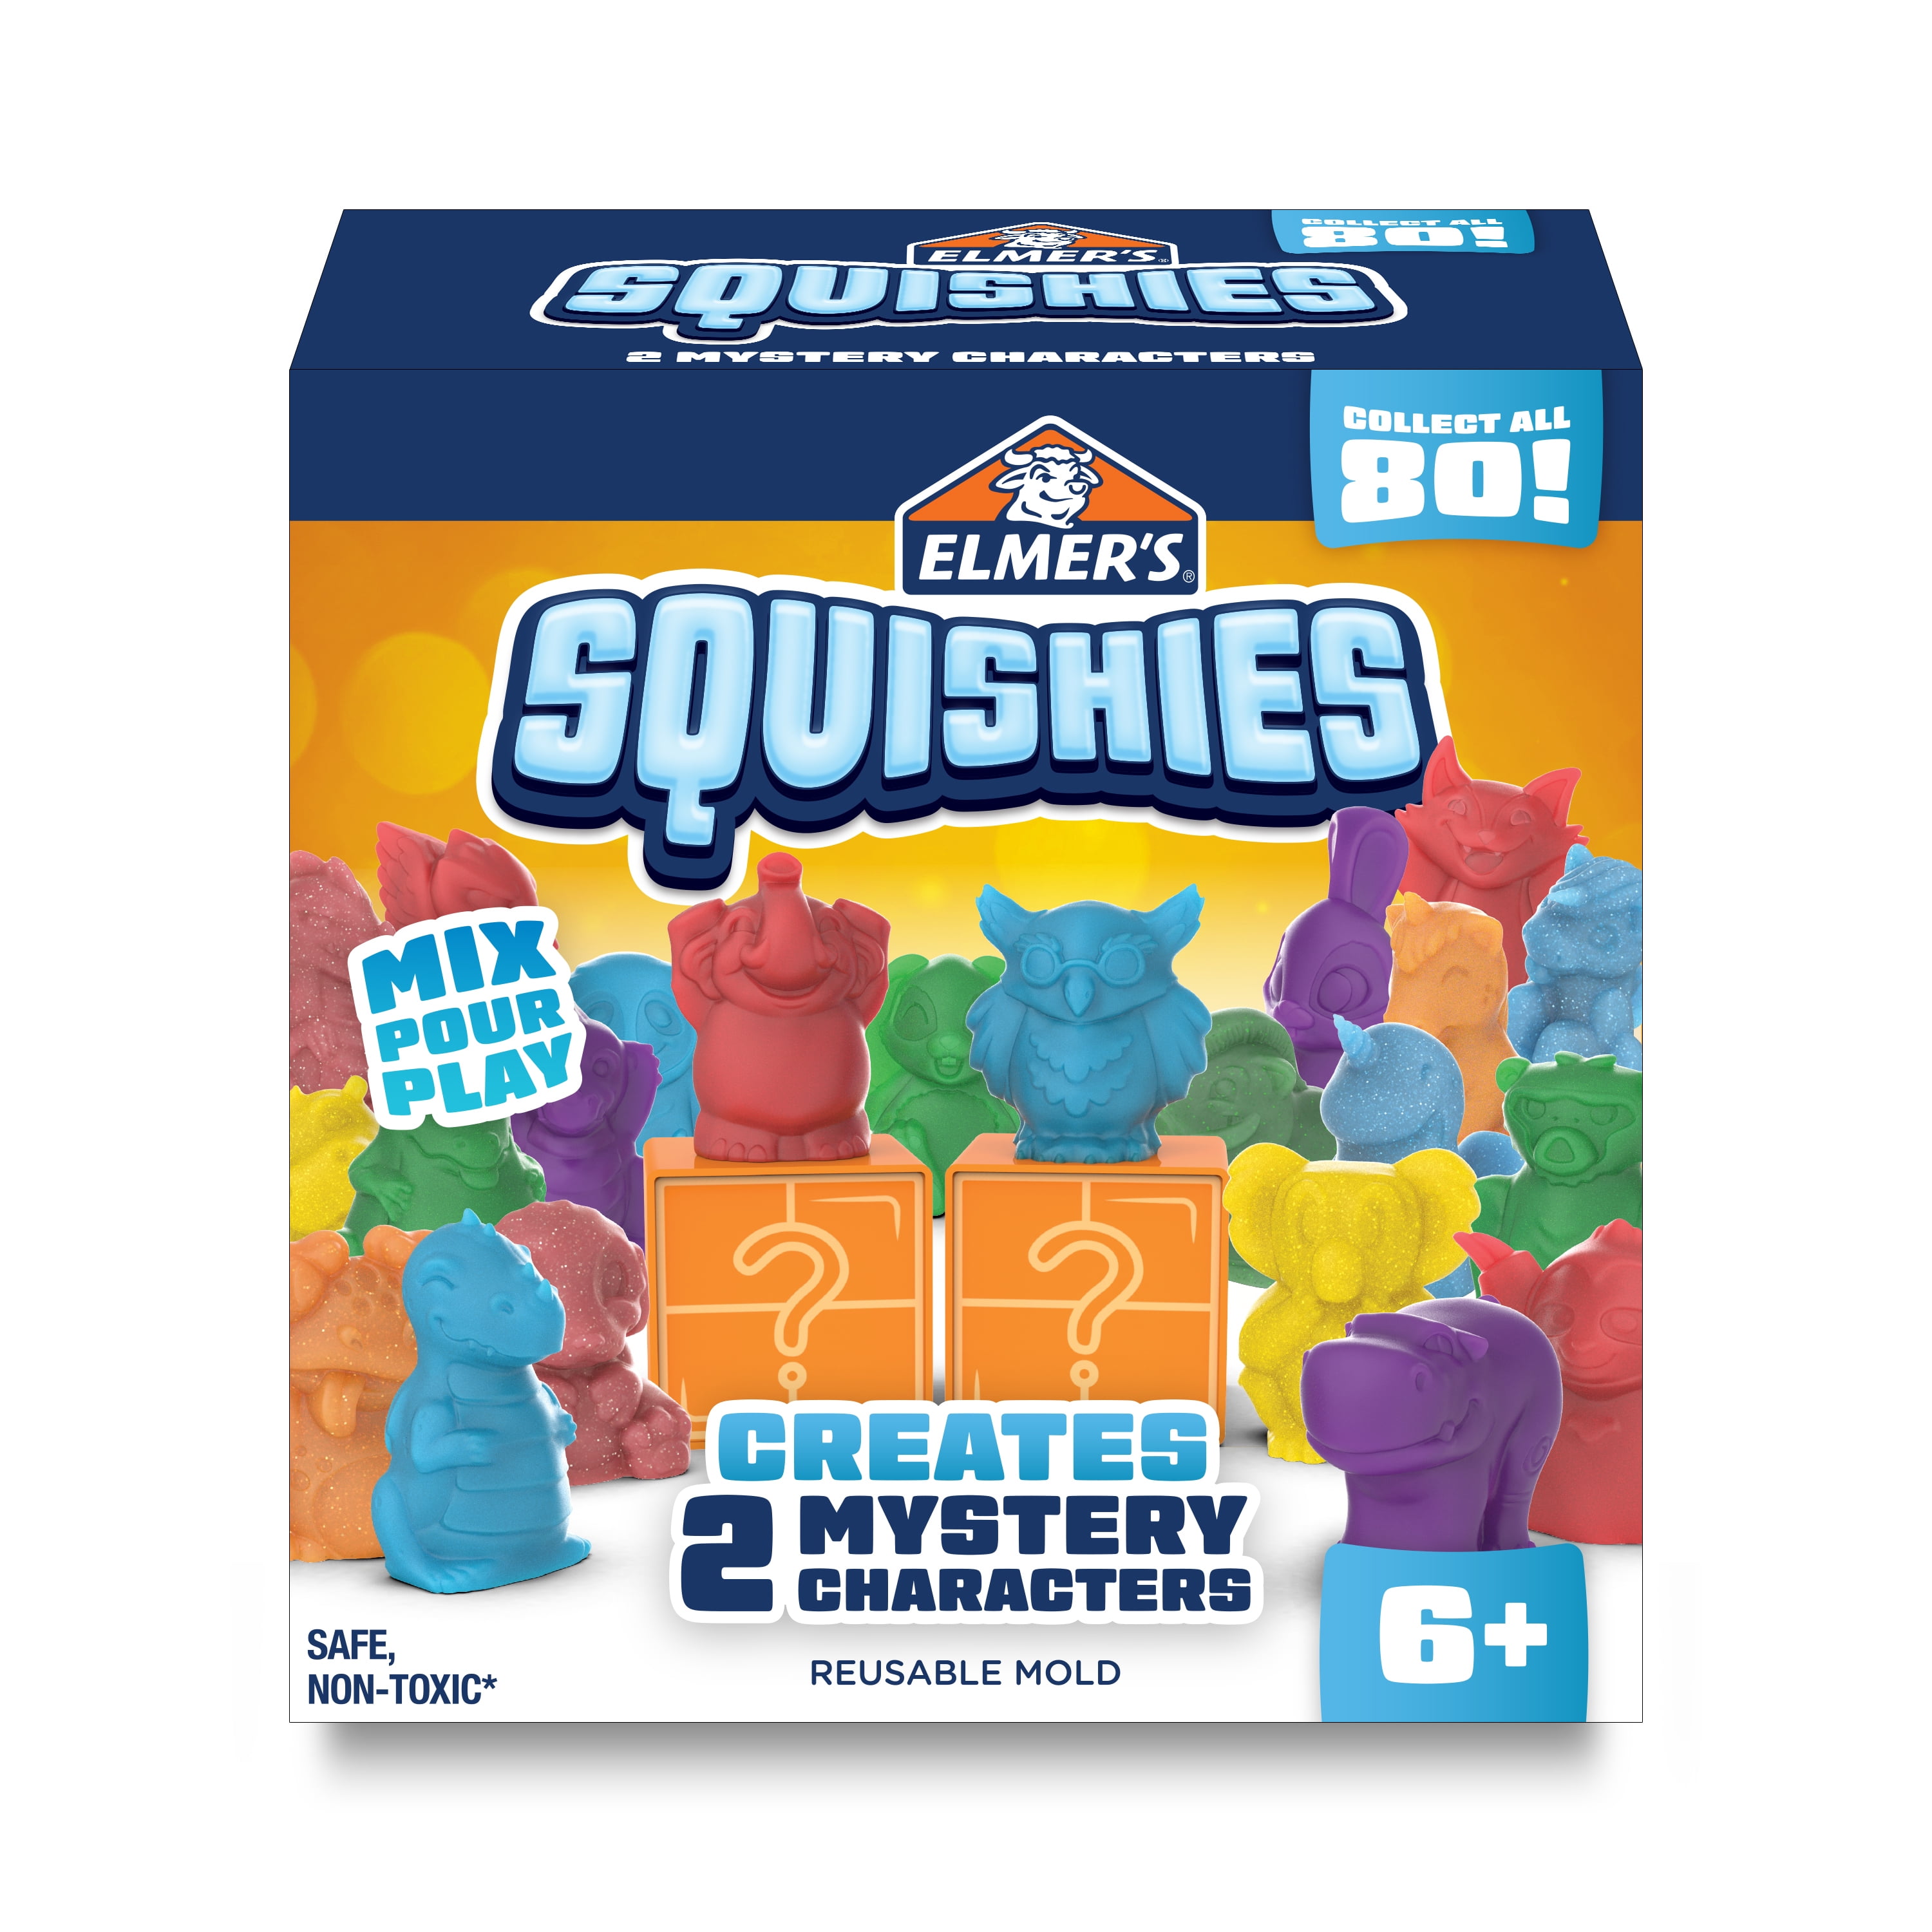 Elmers Squishies DIY Squishy Toy Kit, 2 Count Mystery Characters